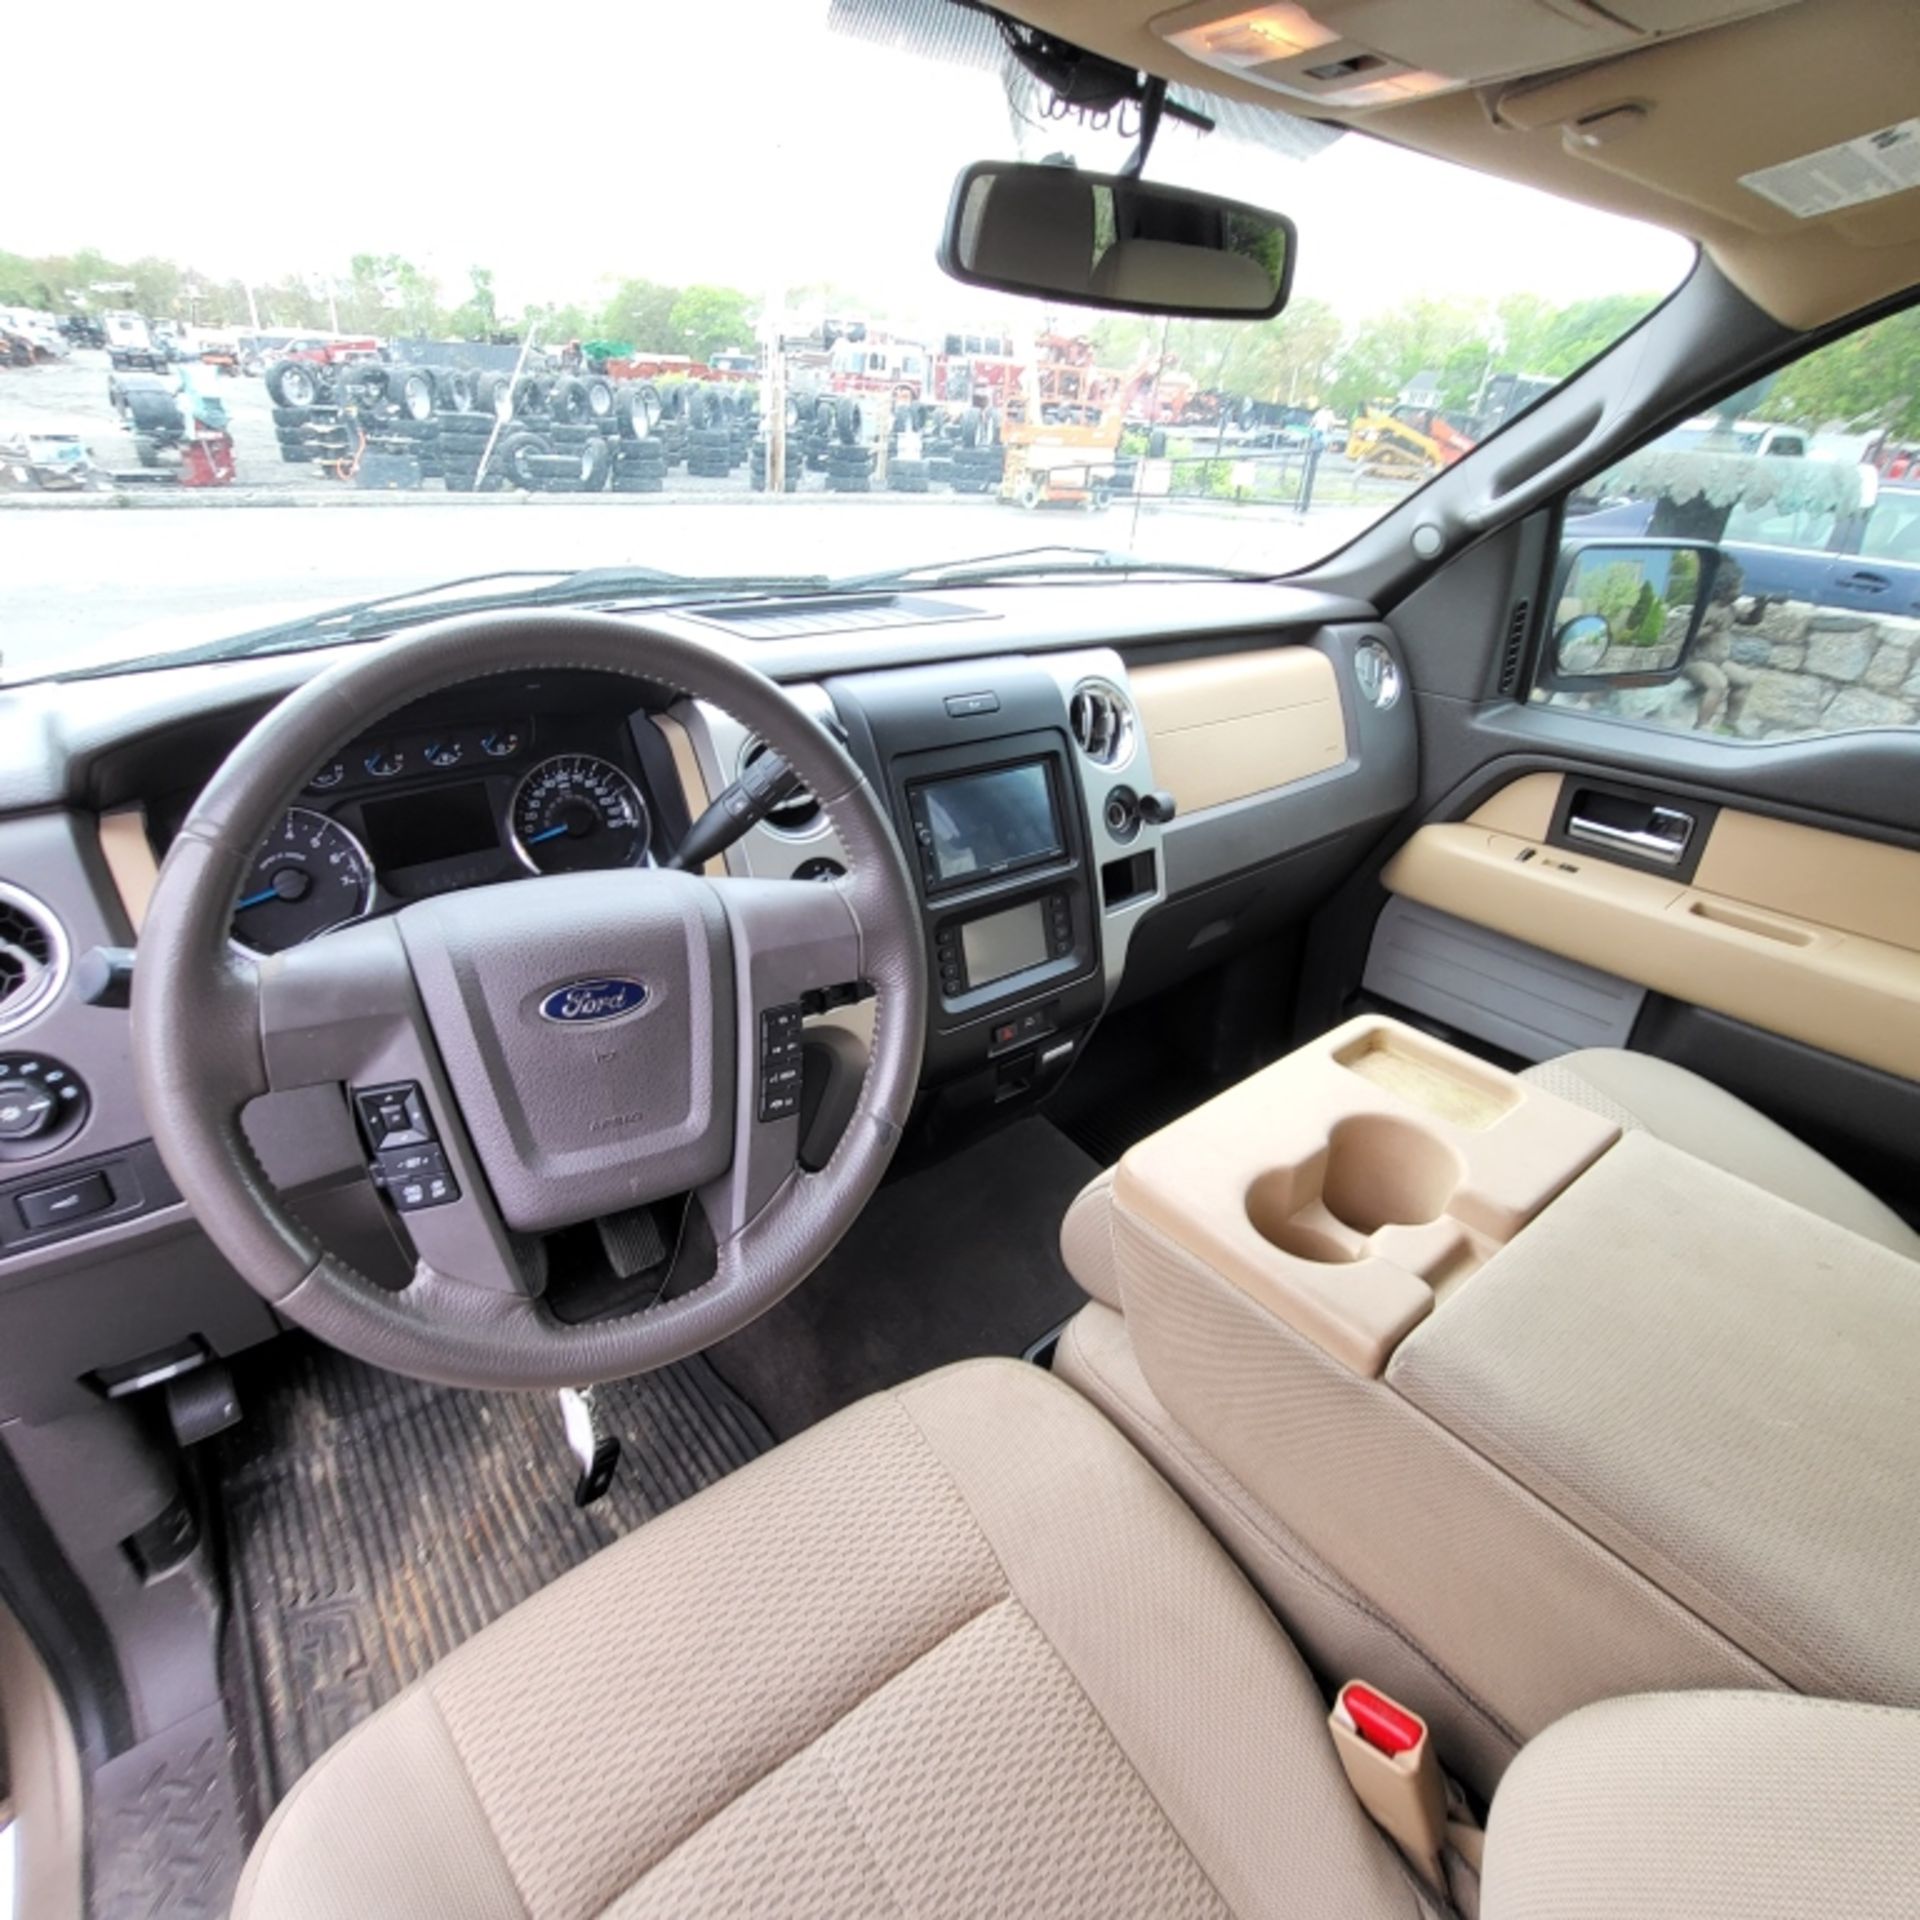 2014 Ford F150 Pickup - Image 19 of 20